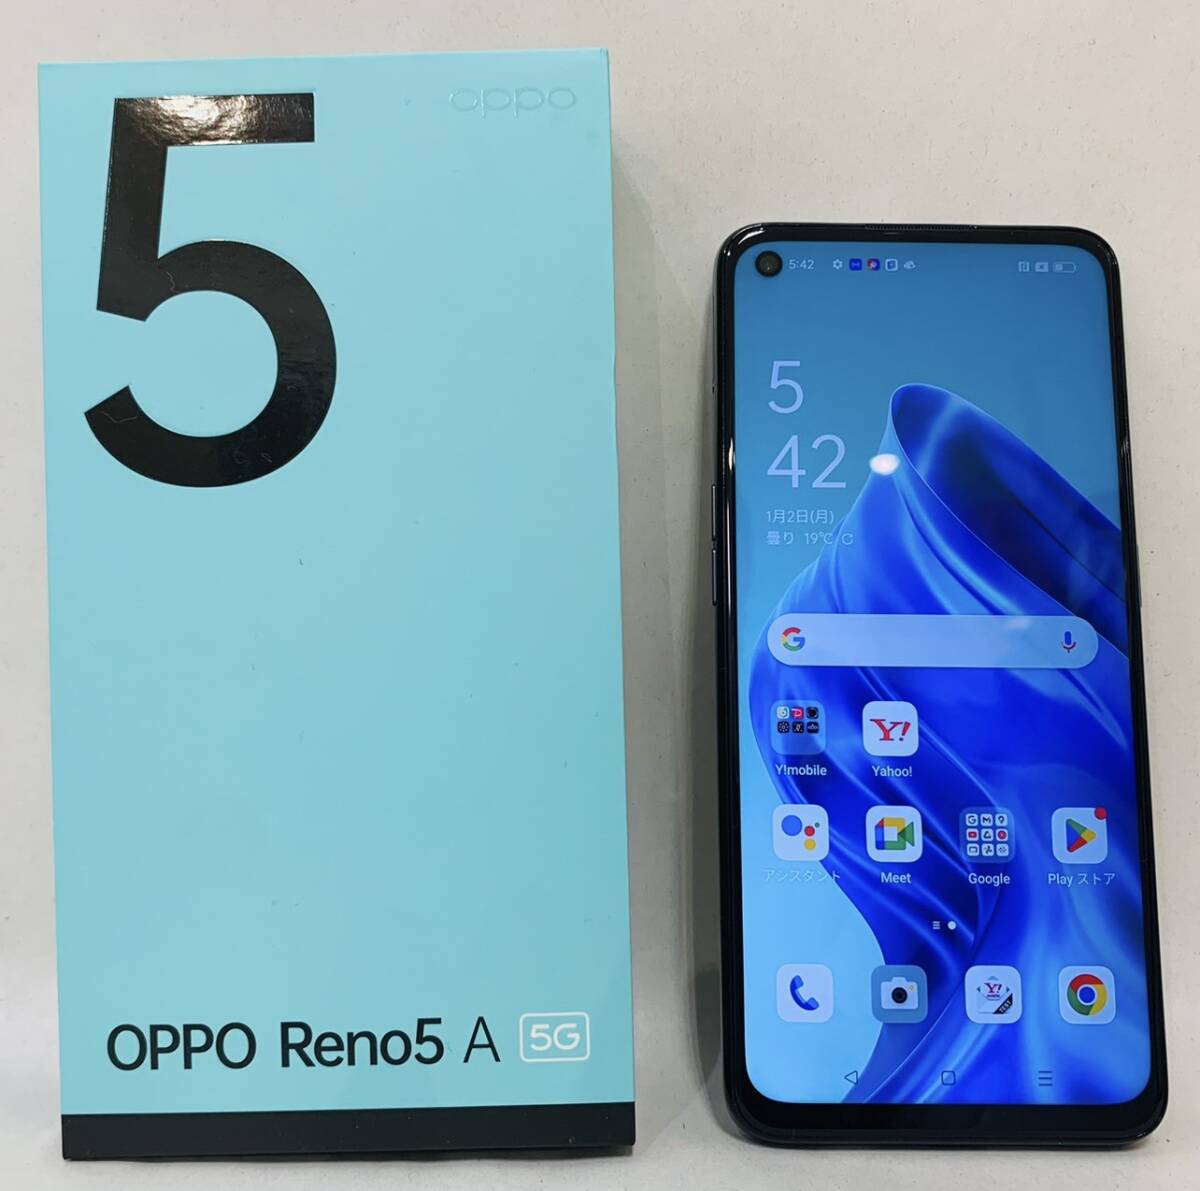 【MSO-5182IR】OPPO Reno5A A10OP 128GB ブラック IMEI:861372051067453 判定〇 箱あり 中古品 付属品なし スマホ android_画像1